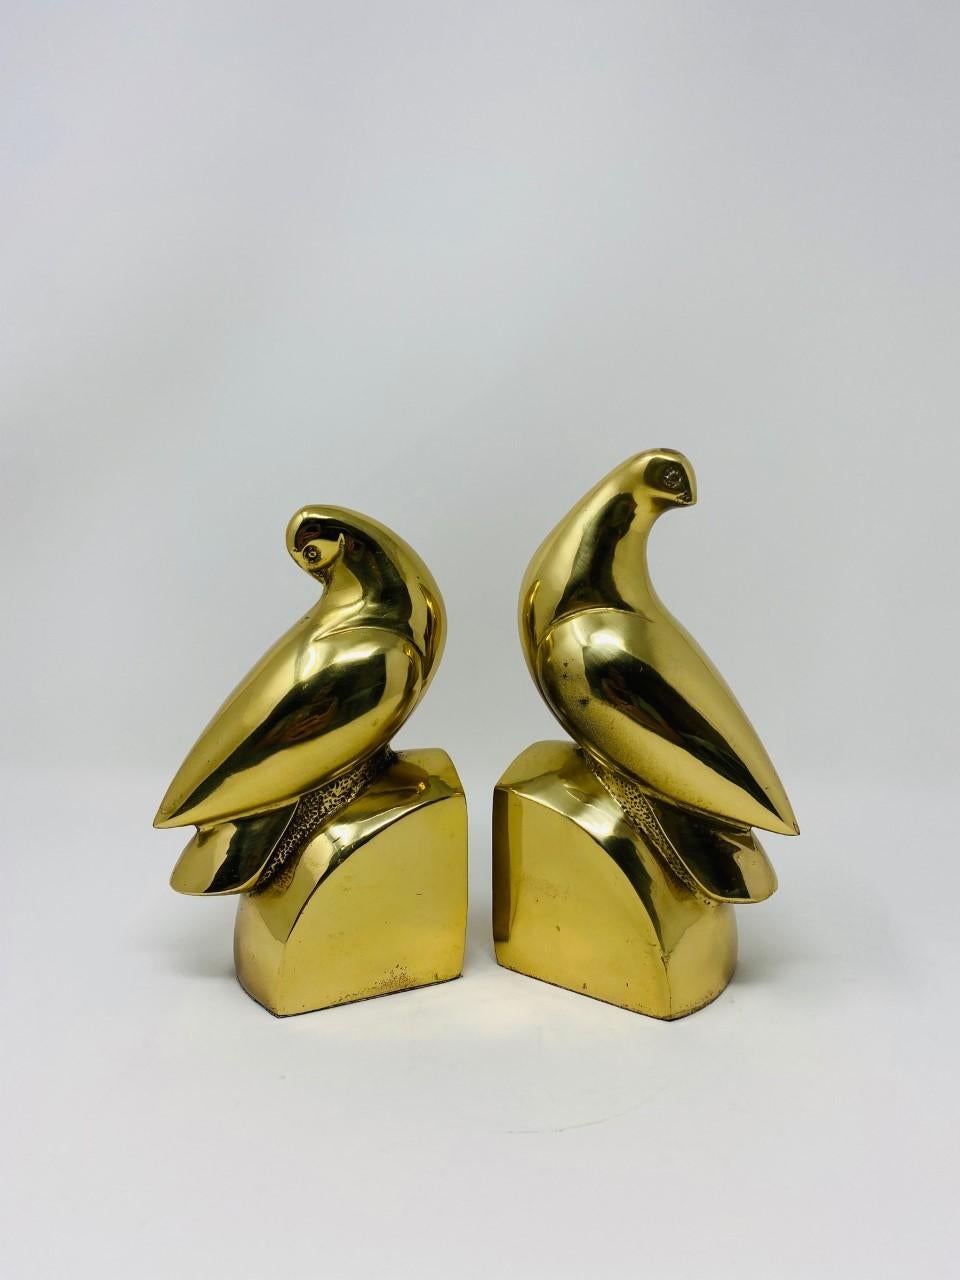 Beautiful pair of Hollywood Regency style bookends. This weighted pair sculpted from brass, brings charm and glamour at the same time. Sculptural and gilded, they will bring light and beauty to your décor. The beauty and design of these bookends can